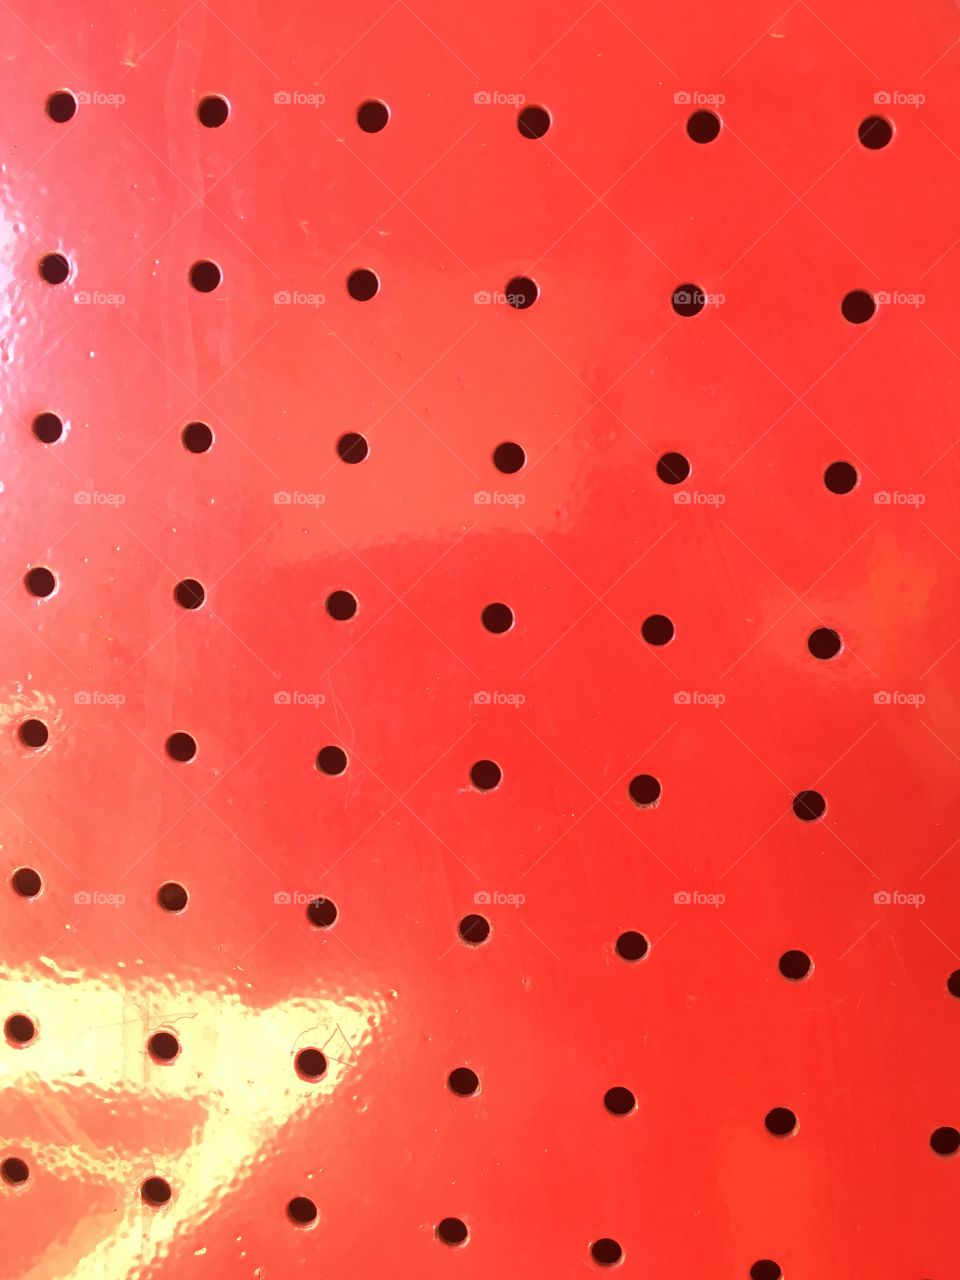 Red holed panel patterns